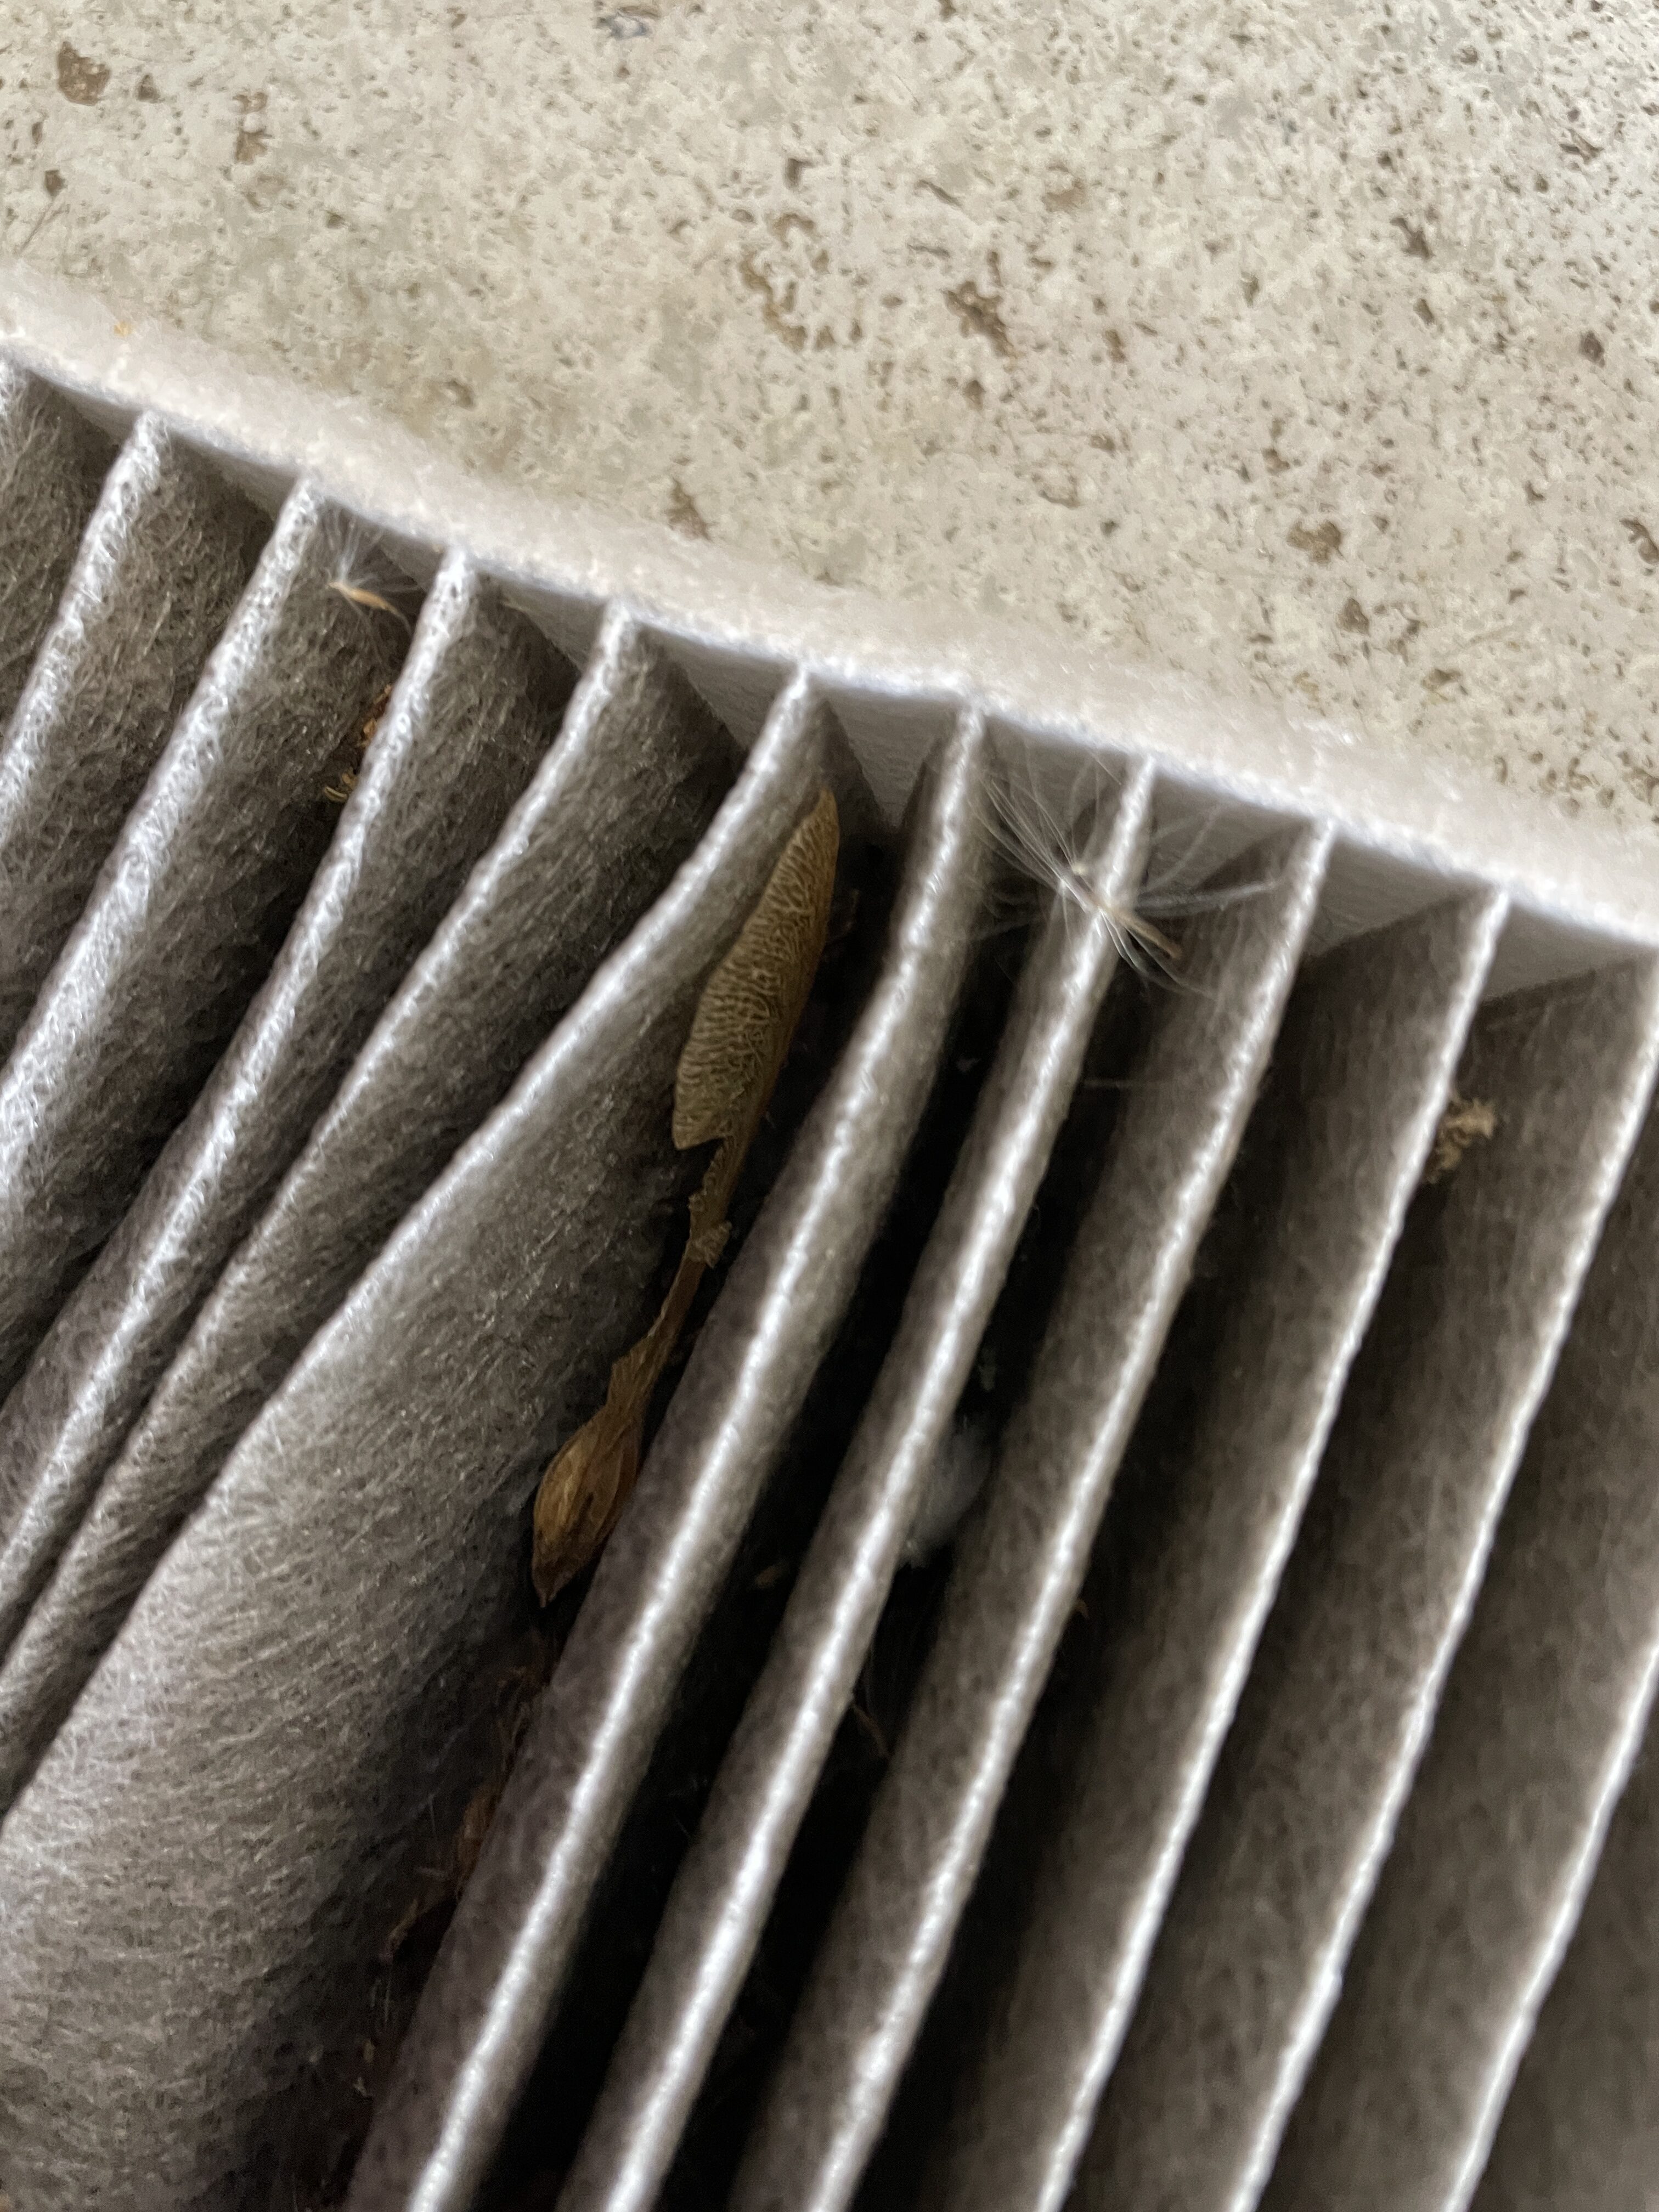 Why do I need to replace my cabin air filter?